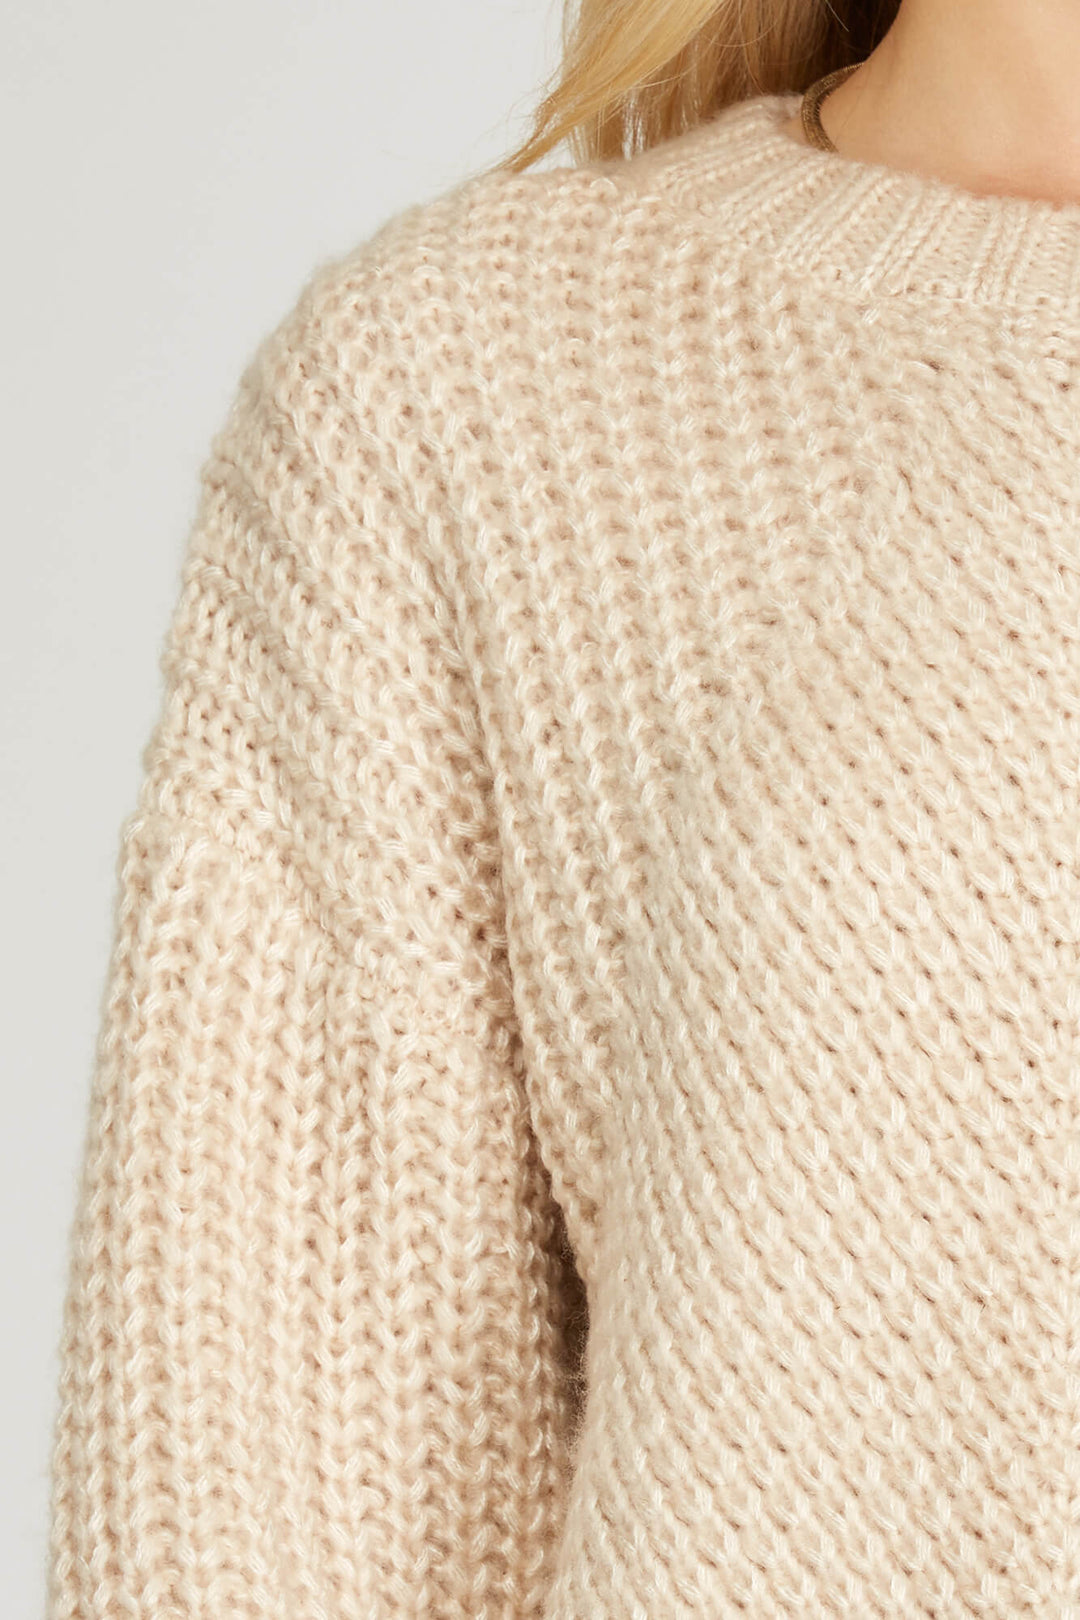 Taupe Knit Sweater Top - Sweater